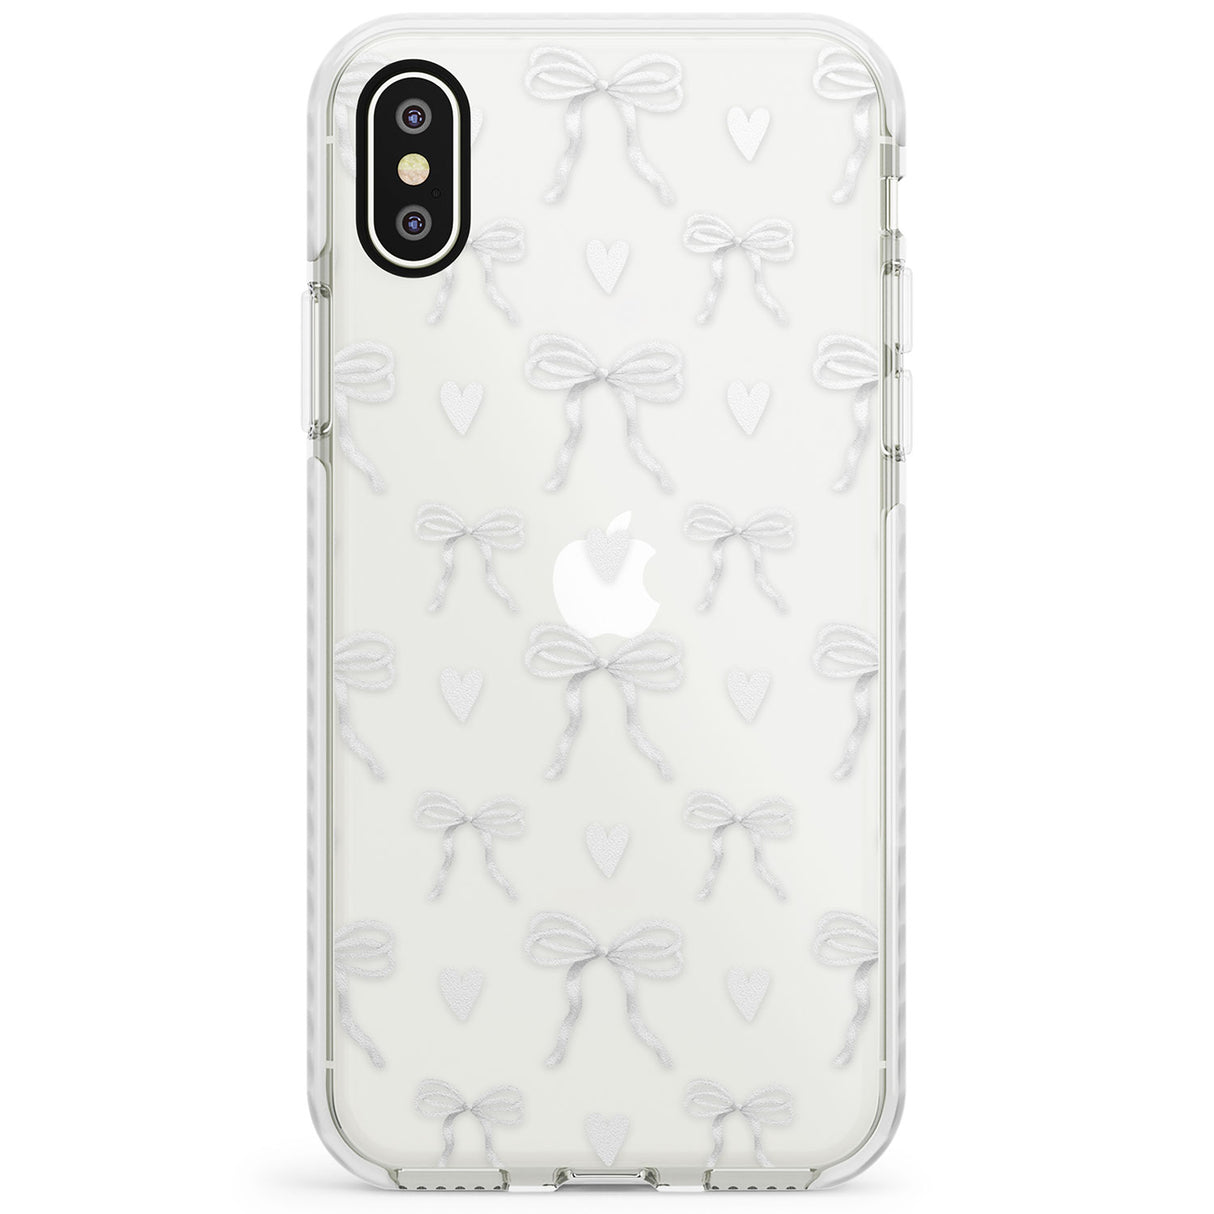 White Bows & Hearts Impact Phone Case for iPhone X XS Max XR